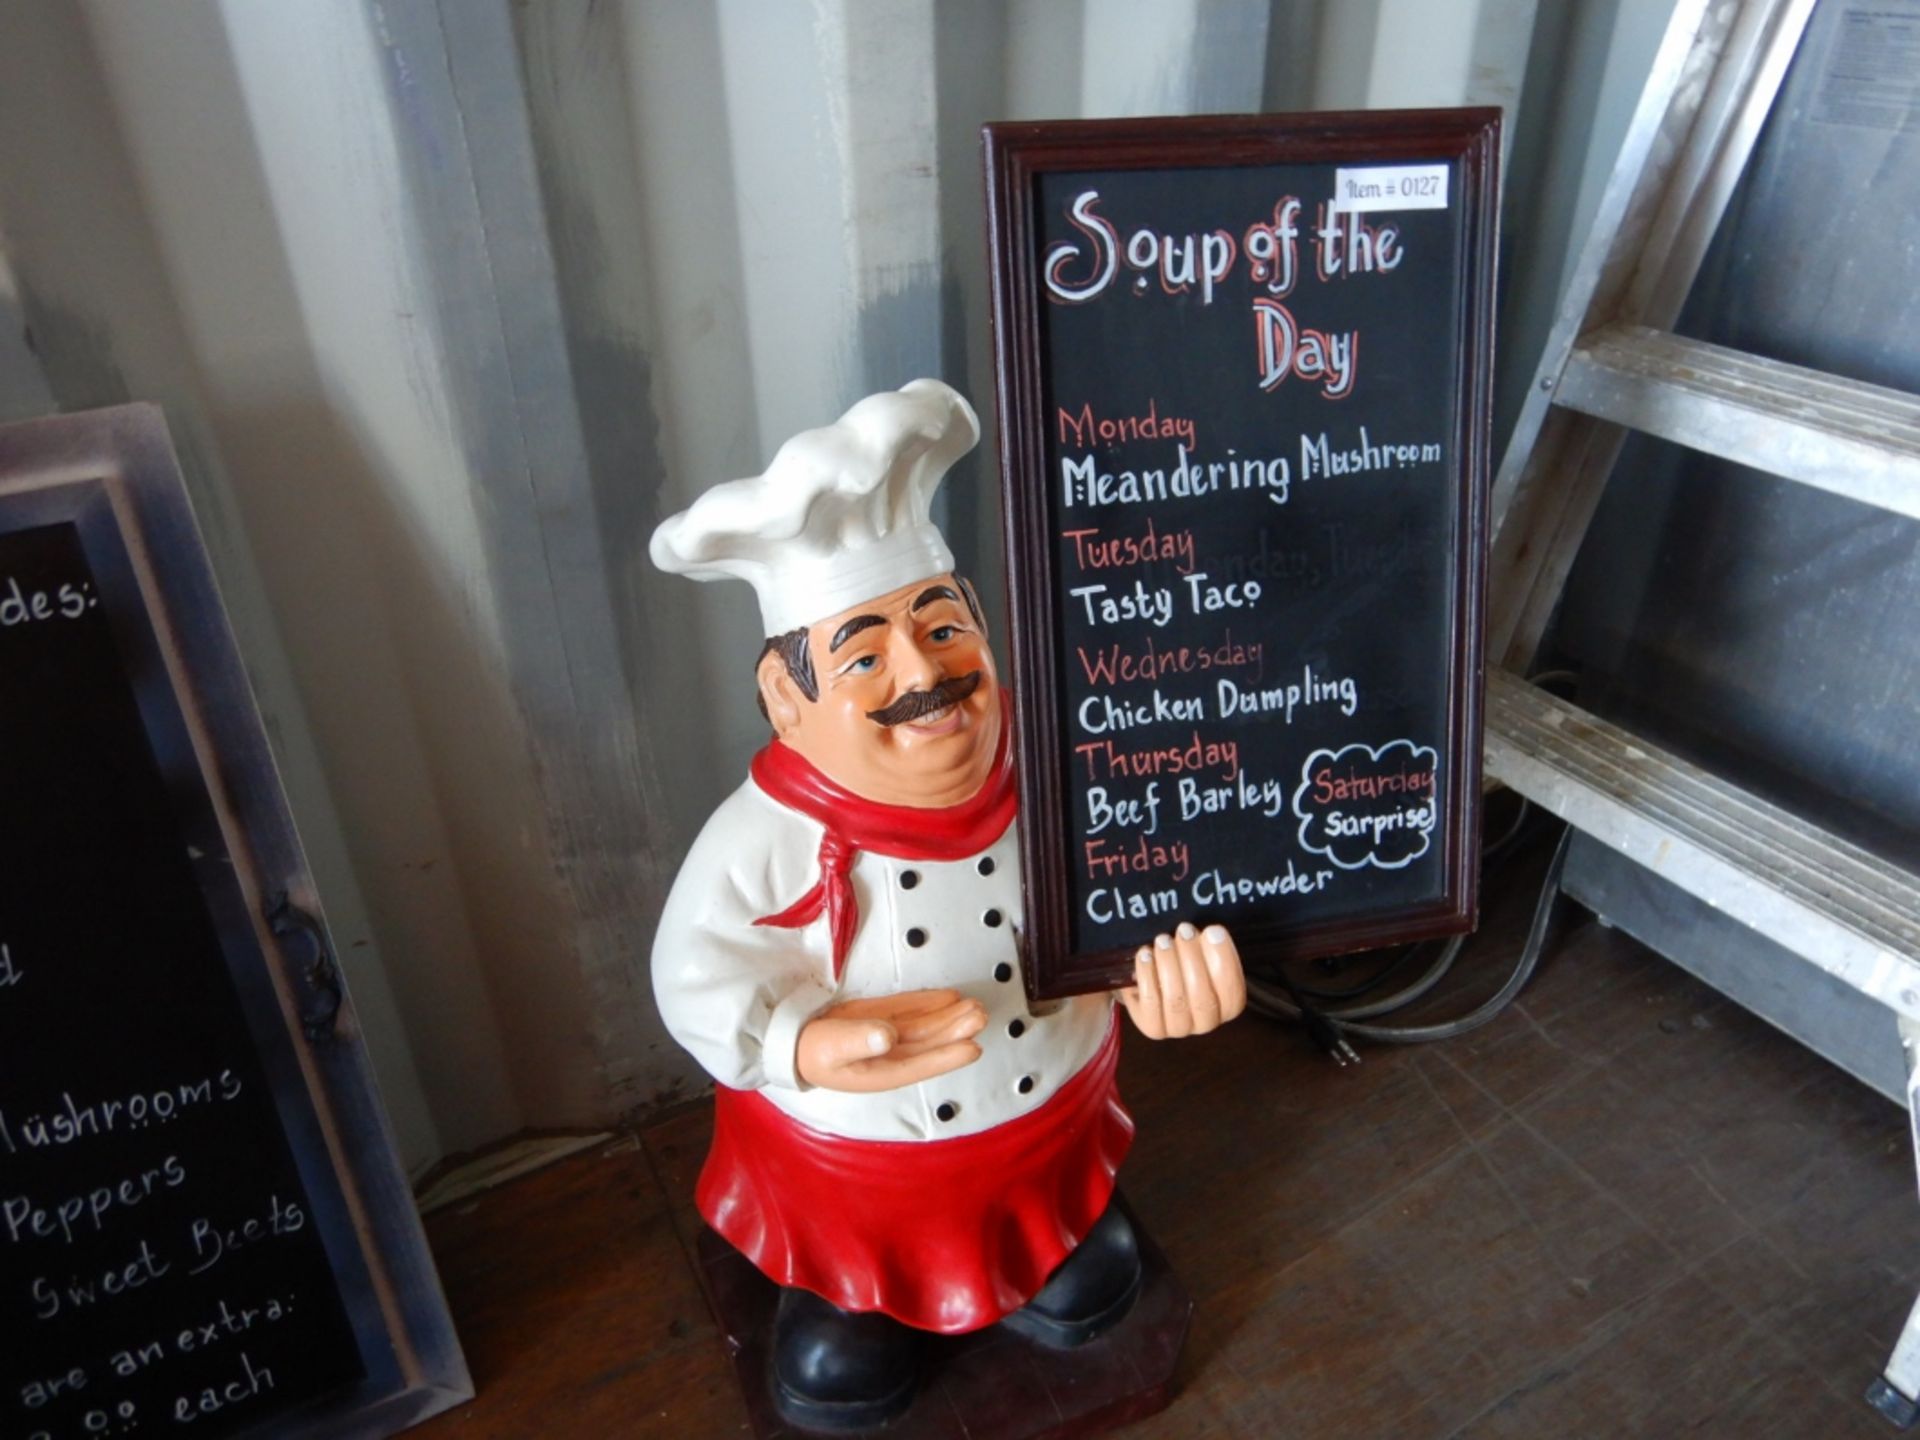 LE CHEF SOUP SIGNAGE STATUE W/FRAMED CHALKBOARD SIGN - 34 INCH HIGH - Image 2 of 2